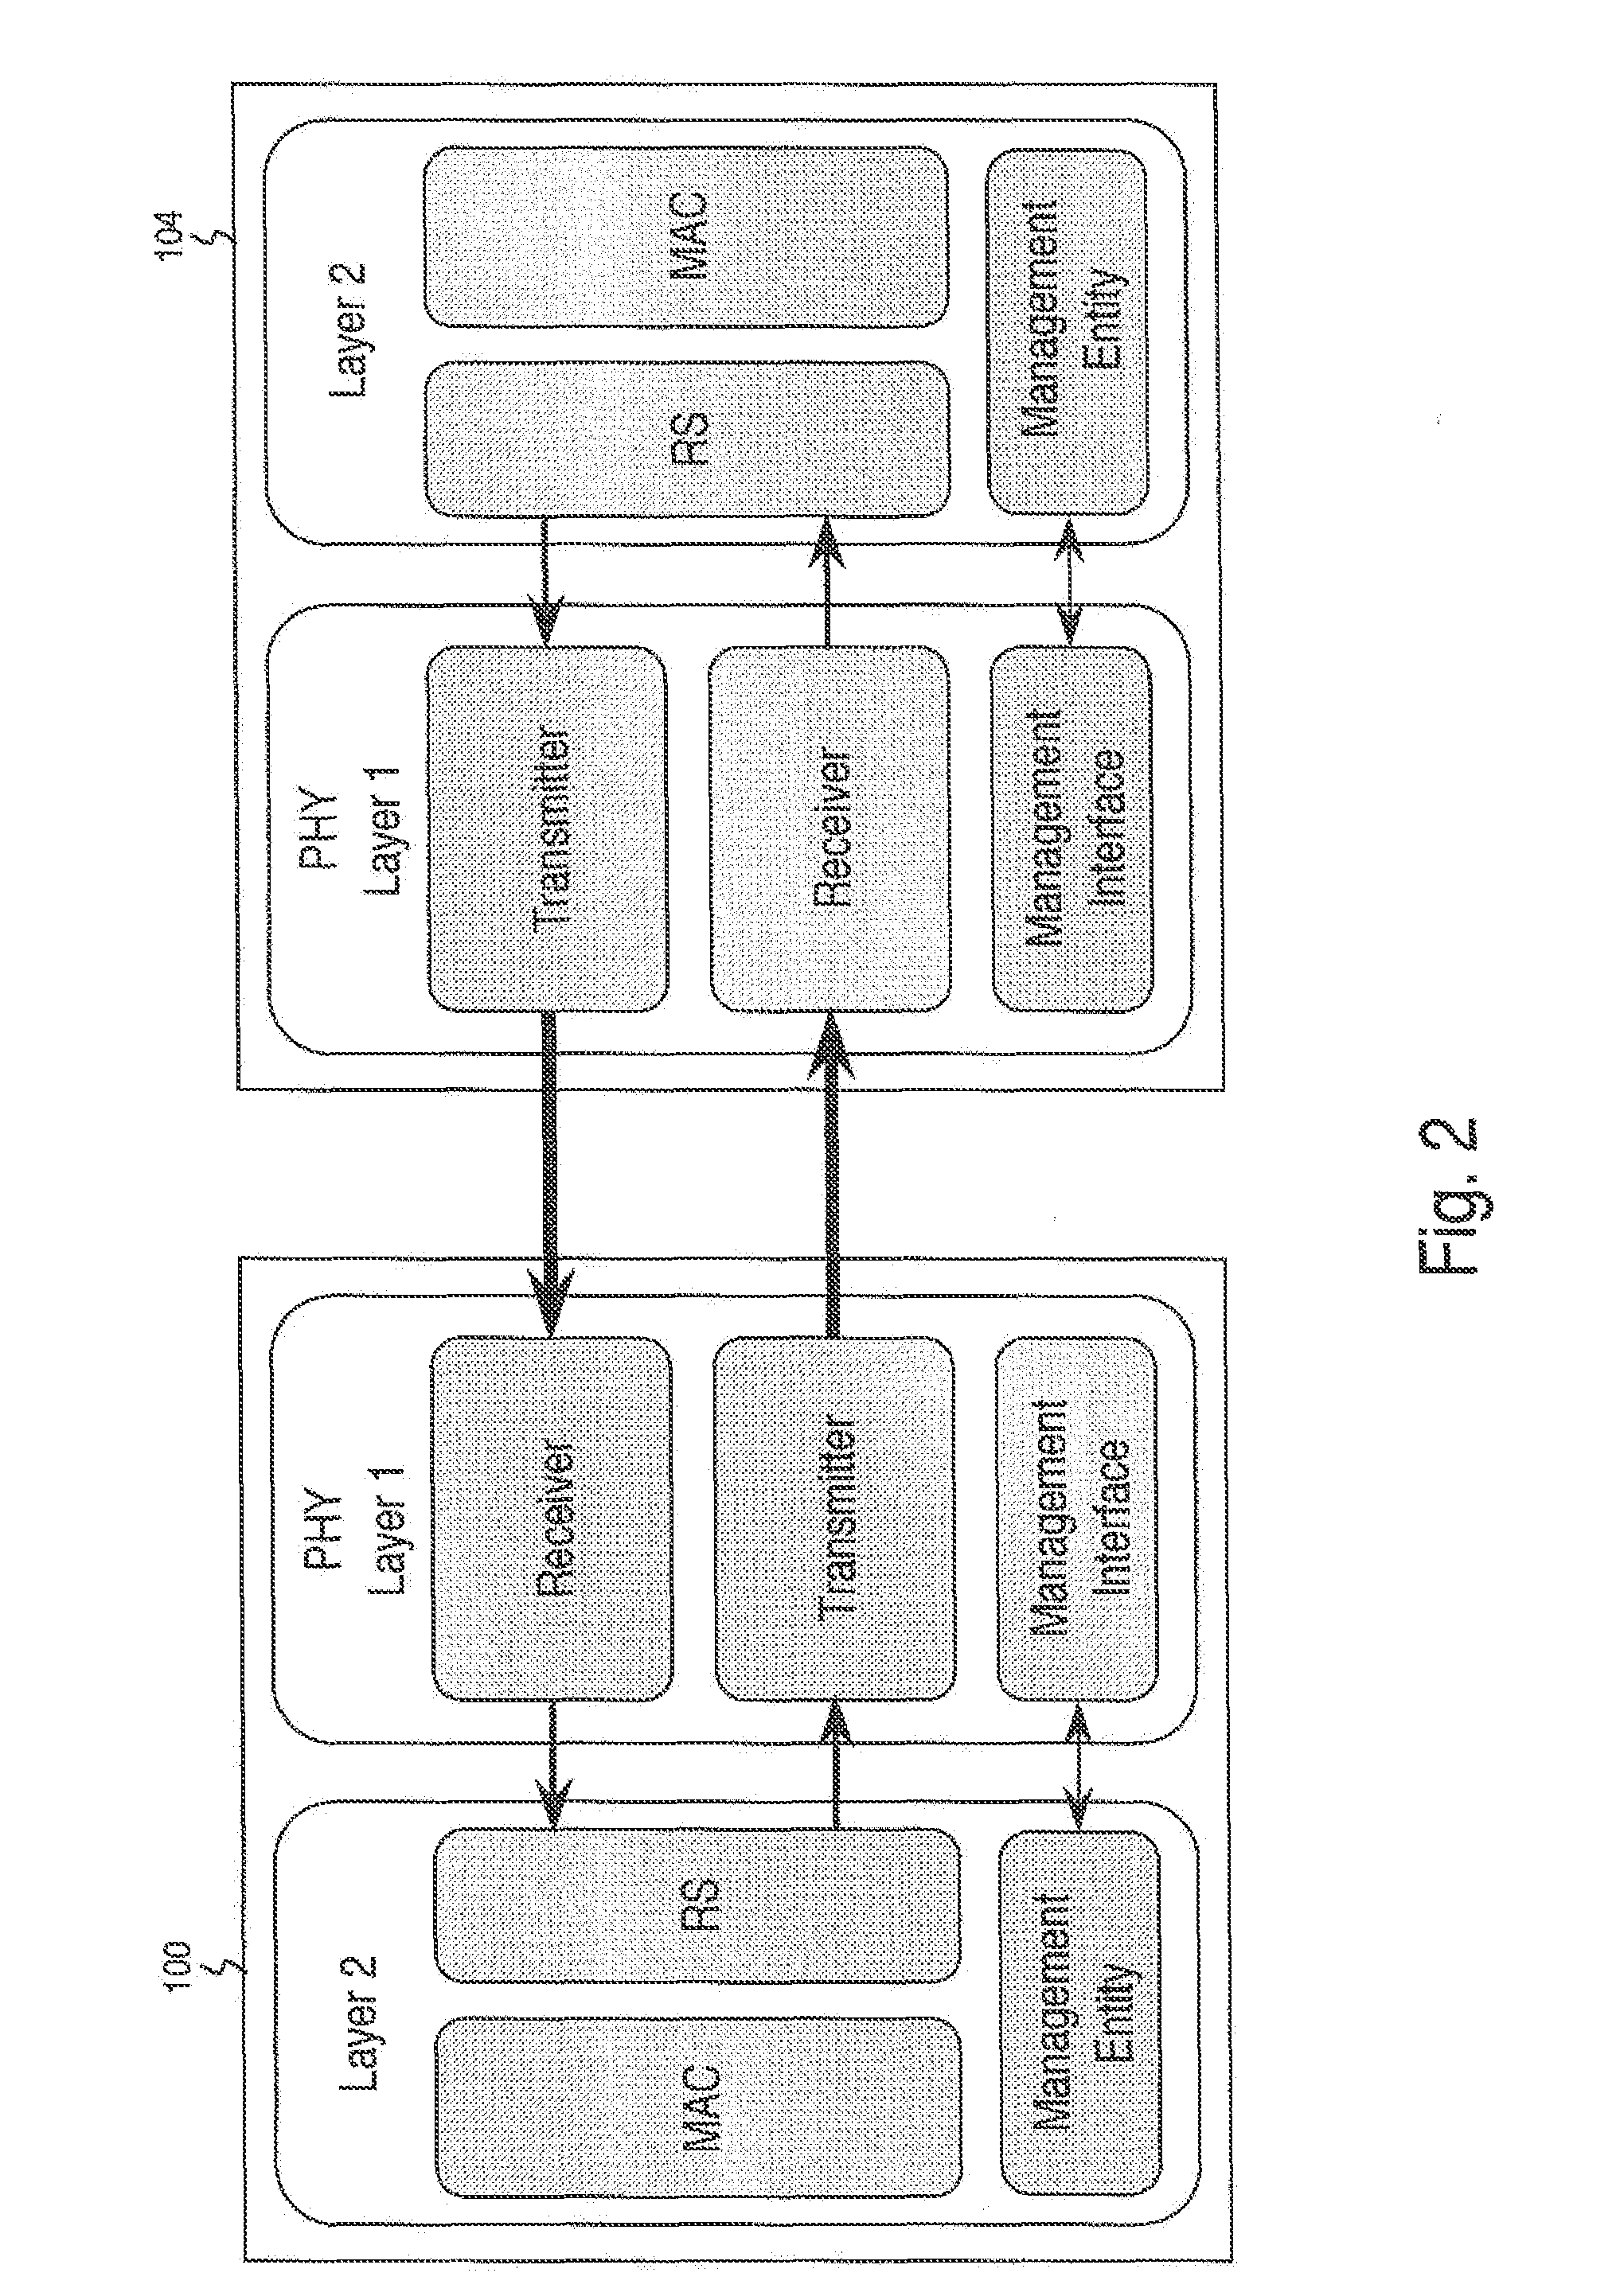 System and method for closed-loop optical network power backoff